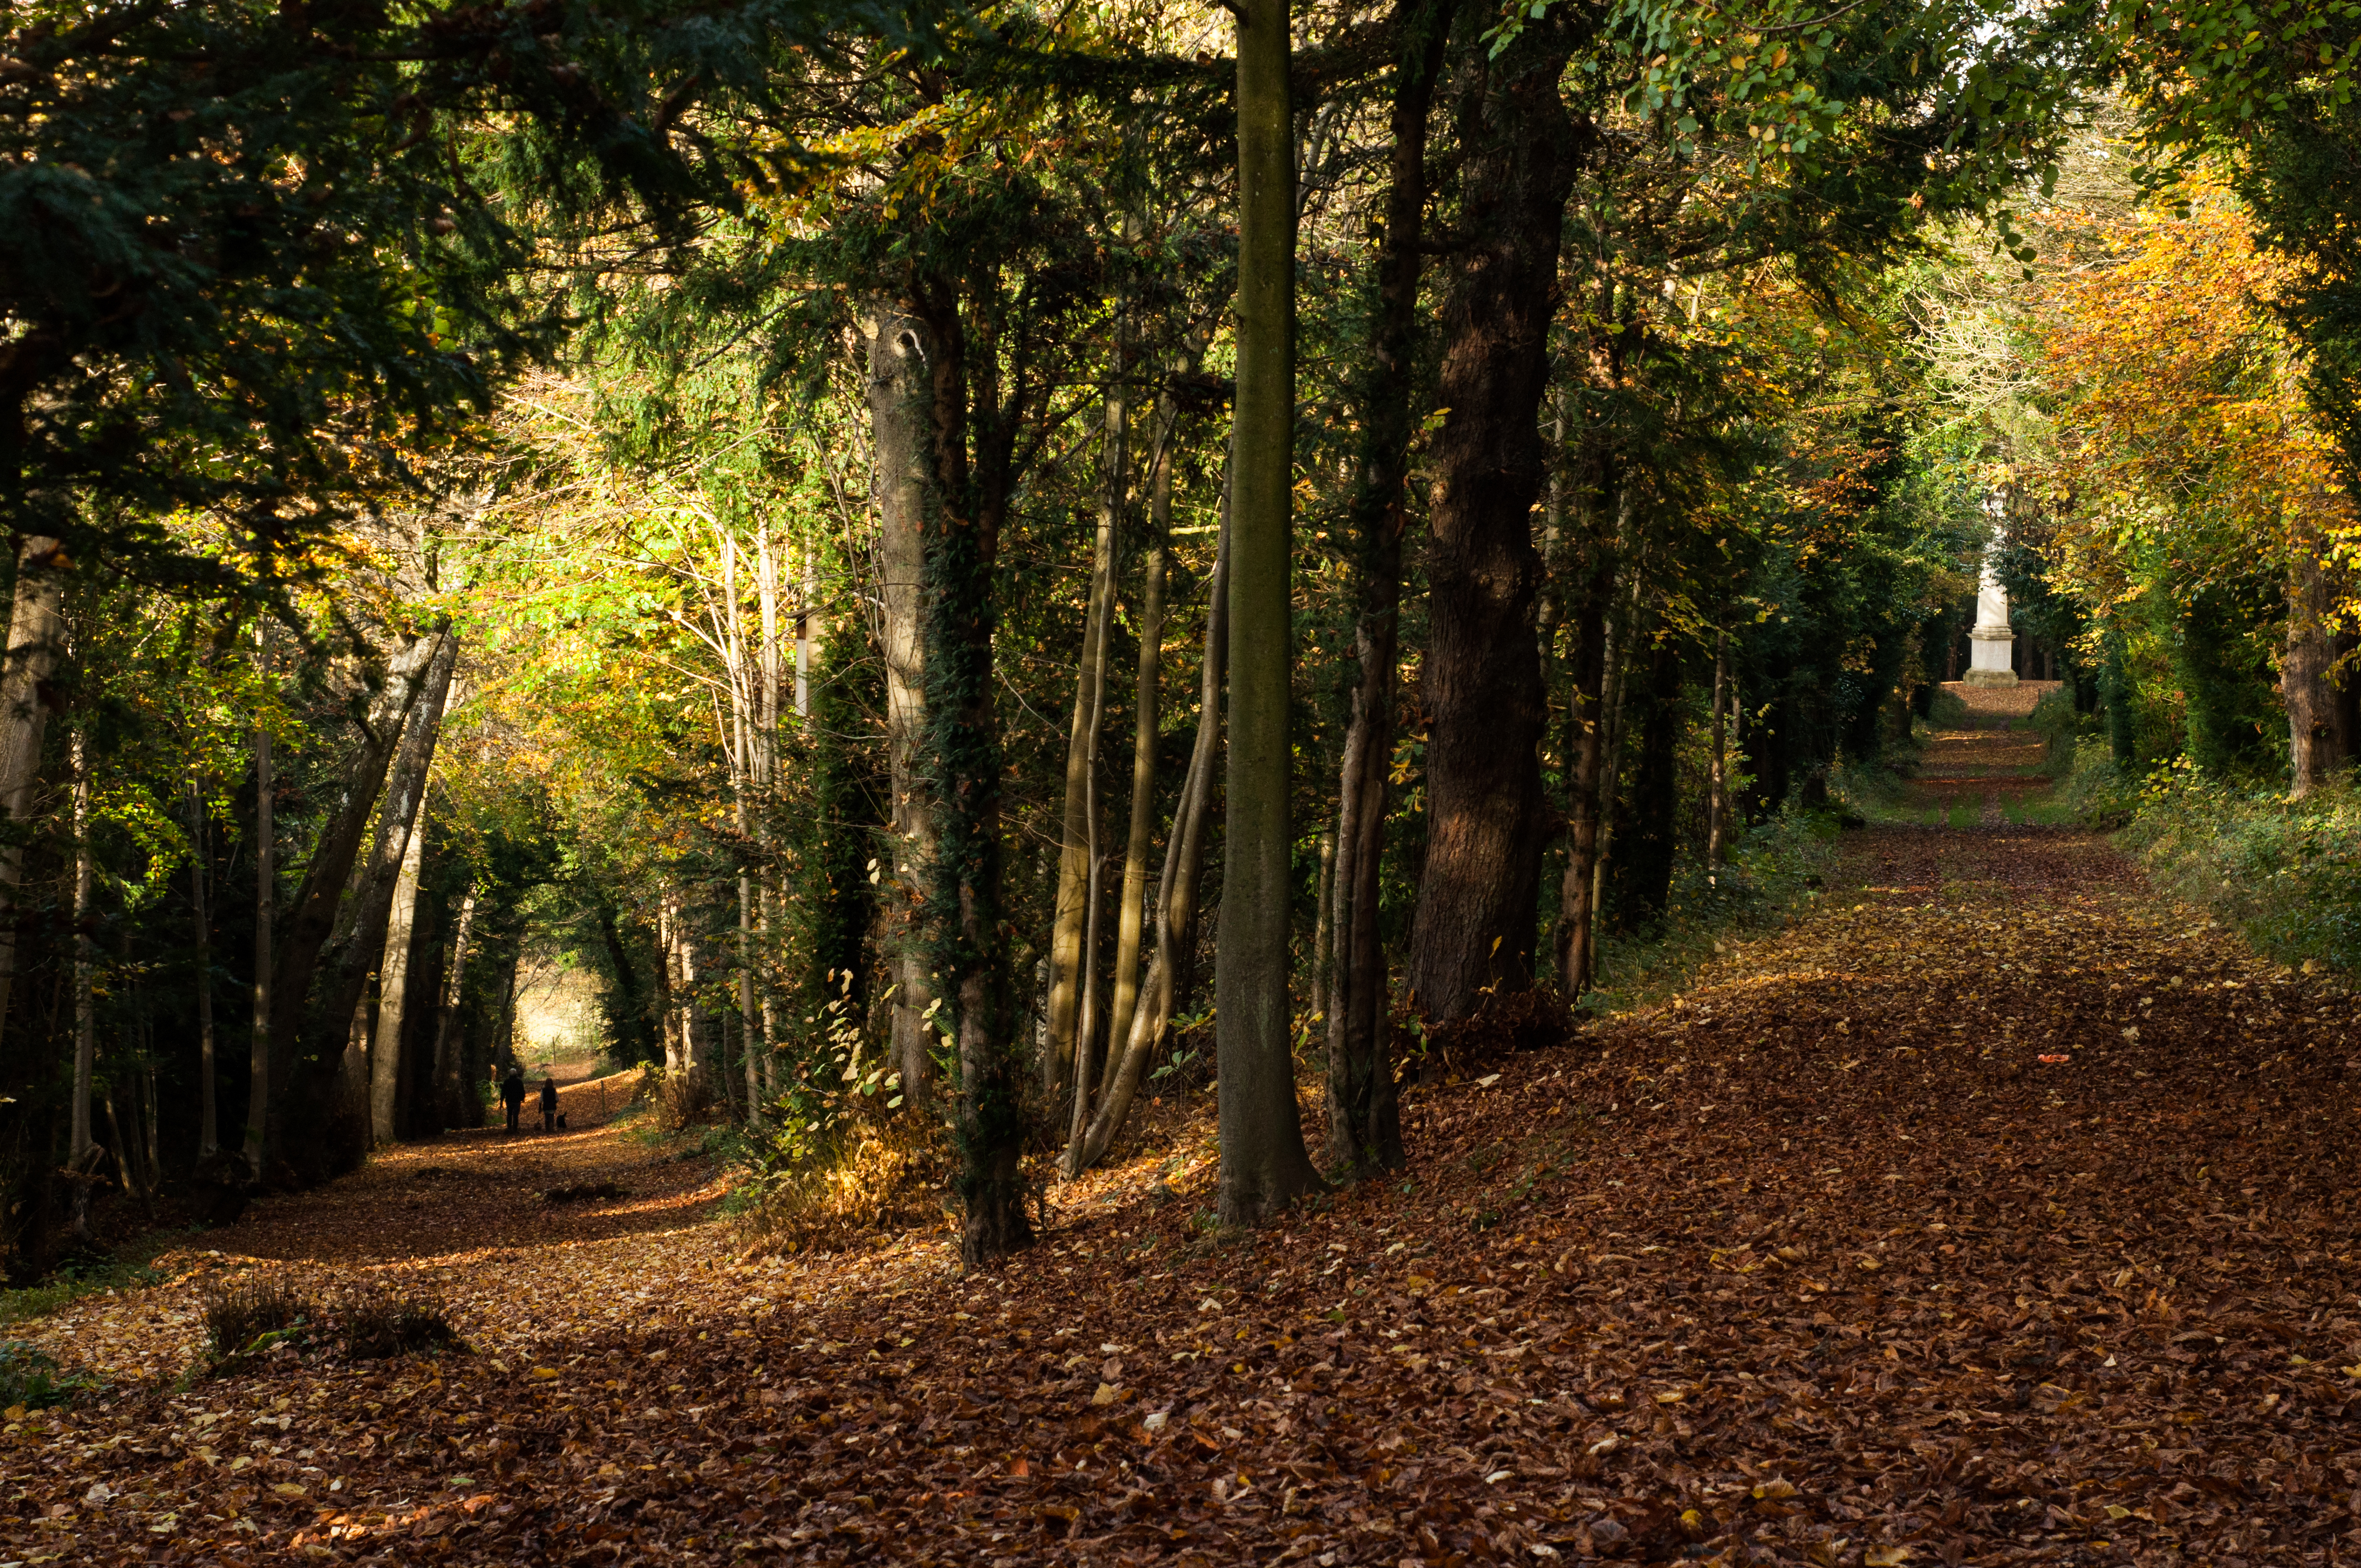 Autumn colours on show in Tring Park in Hertfordshire